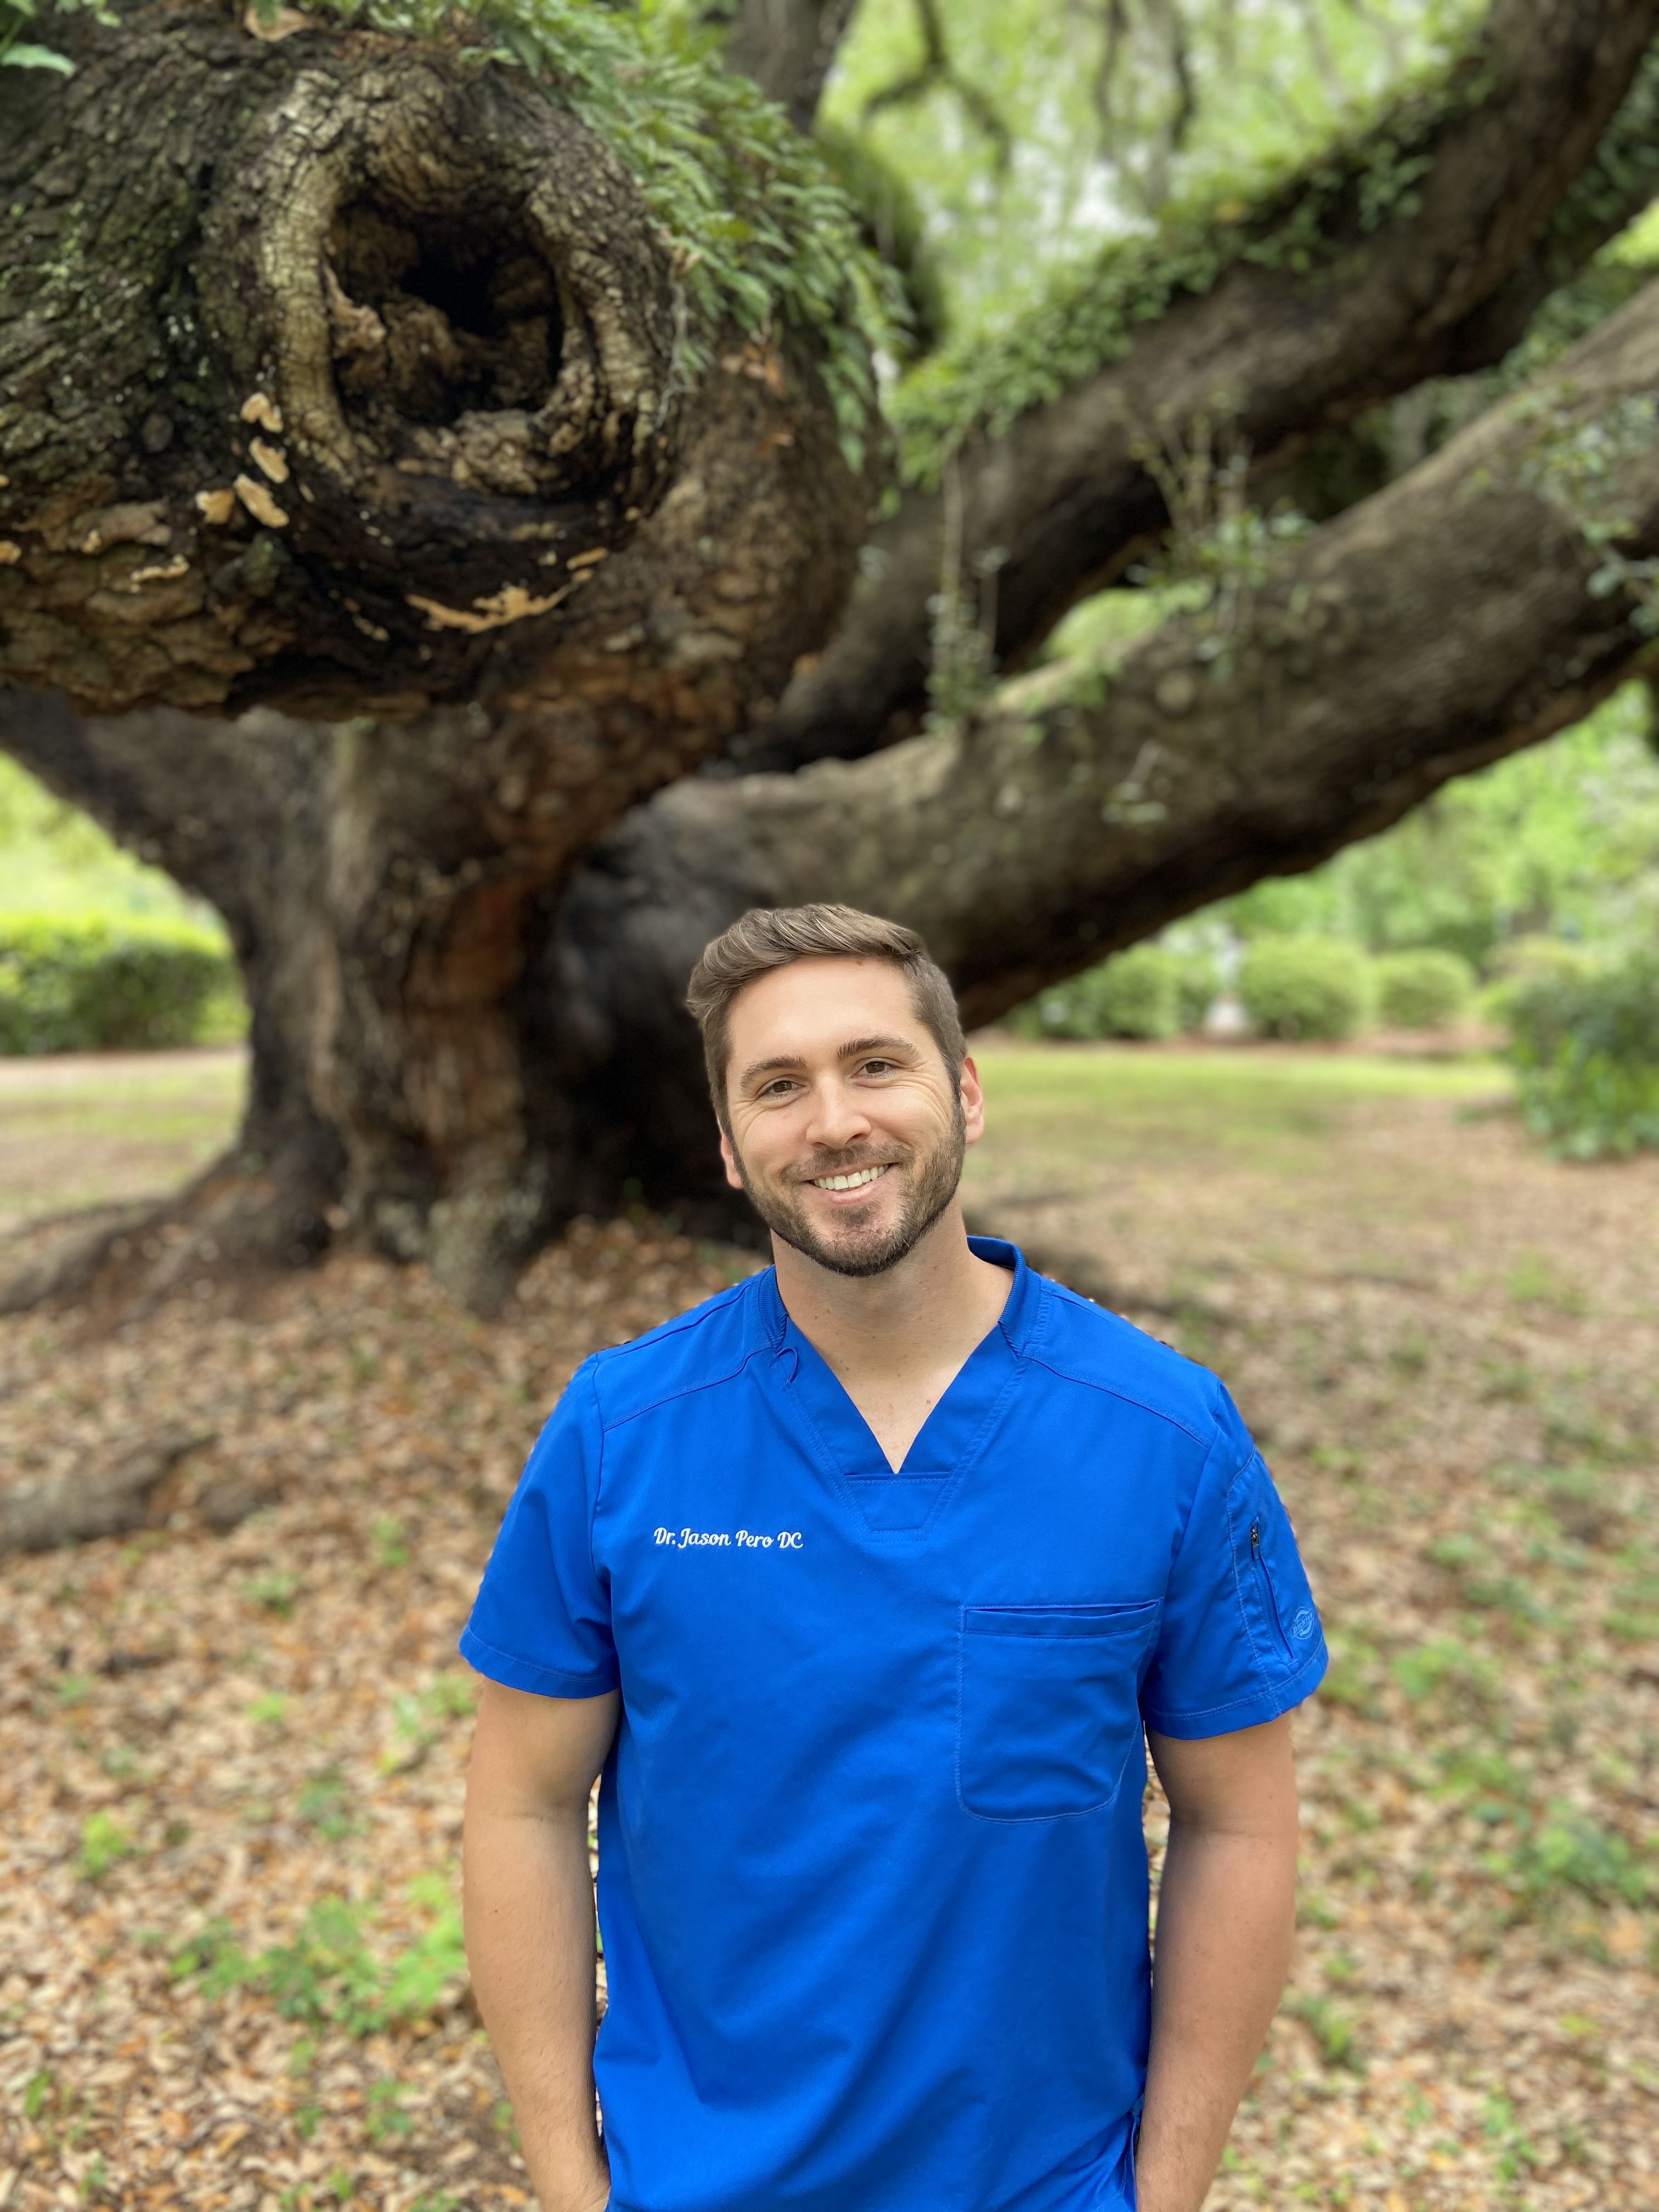 Dr. Jason Pero is a chiropractor in Charleston, SC